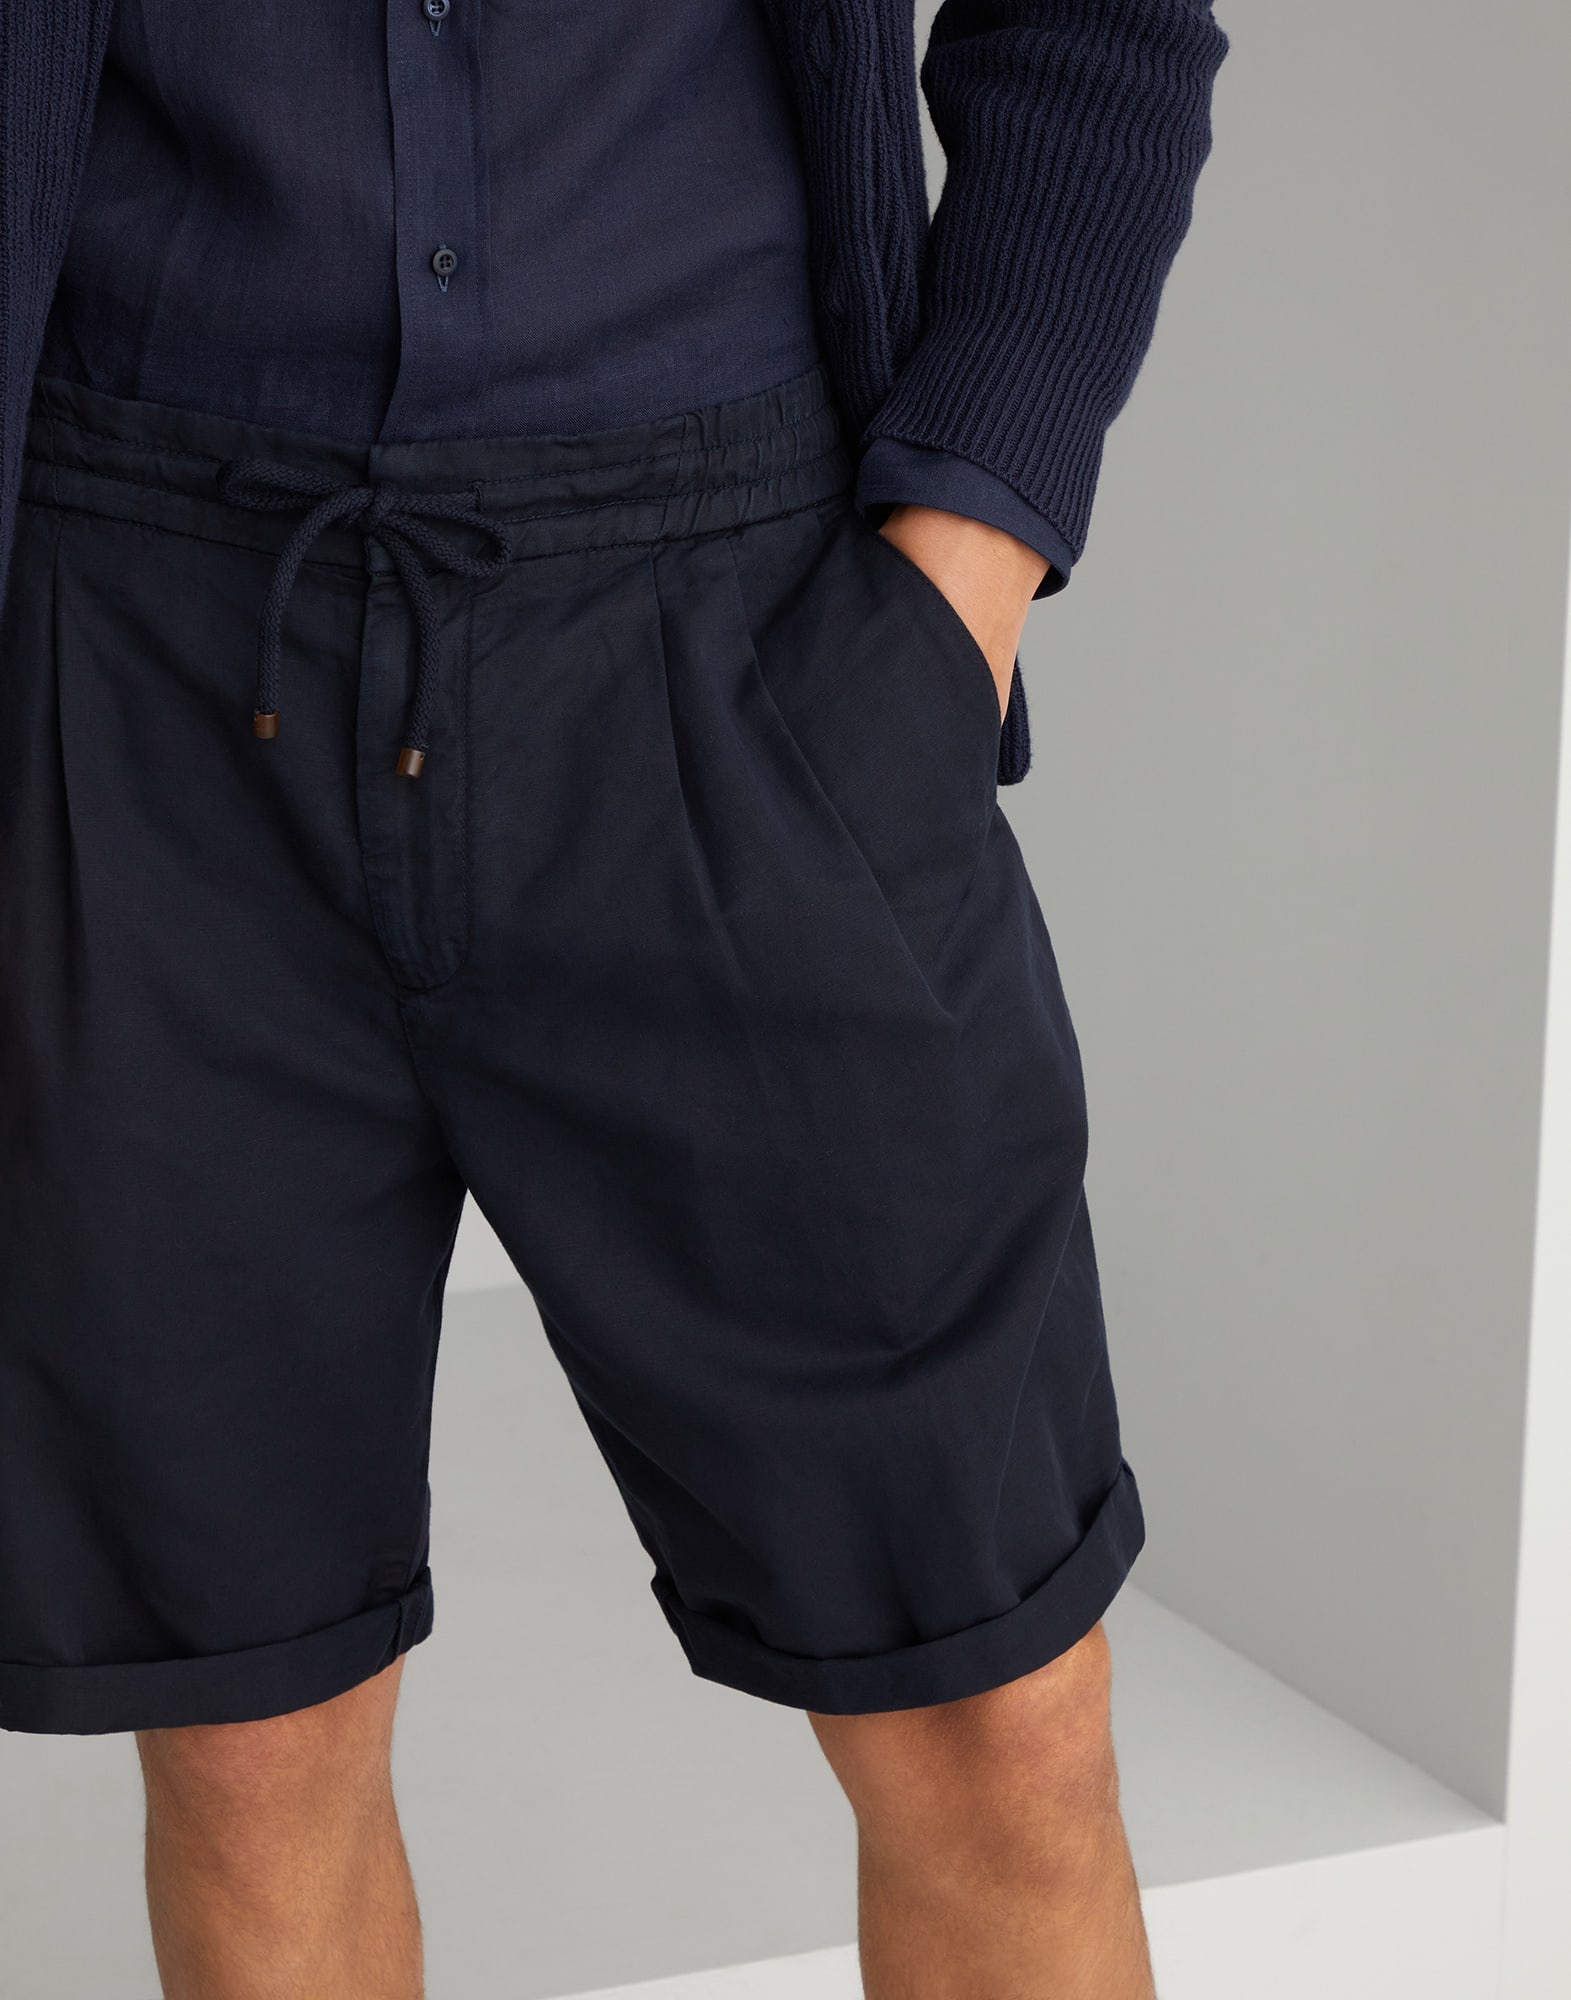 Garment-dyed Bermuda shorts in twisted linen and cotton gabardine with drawstring and double pleats - 3